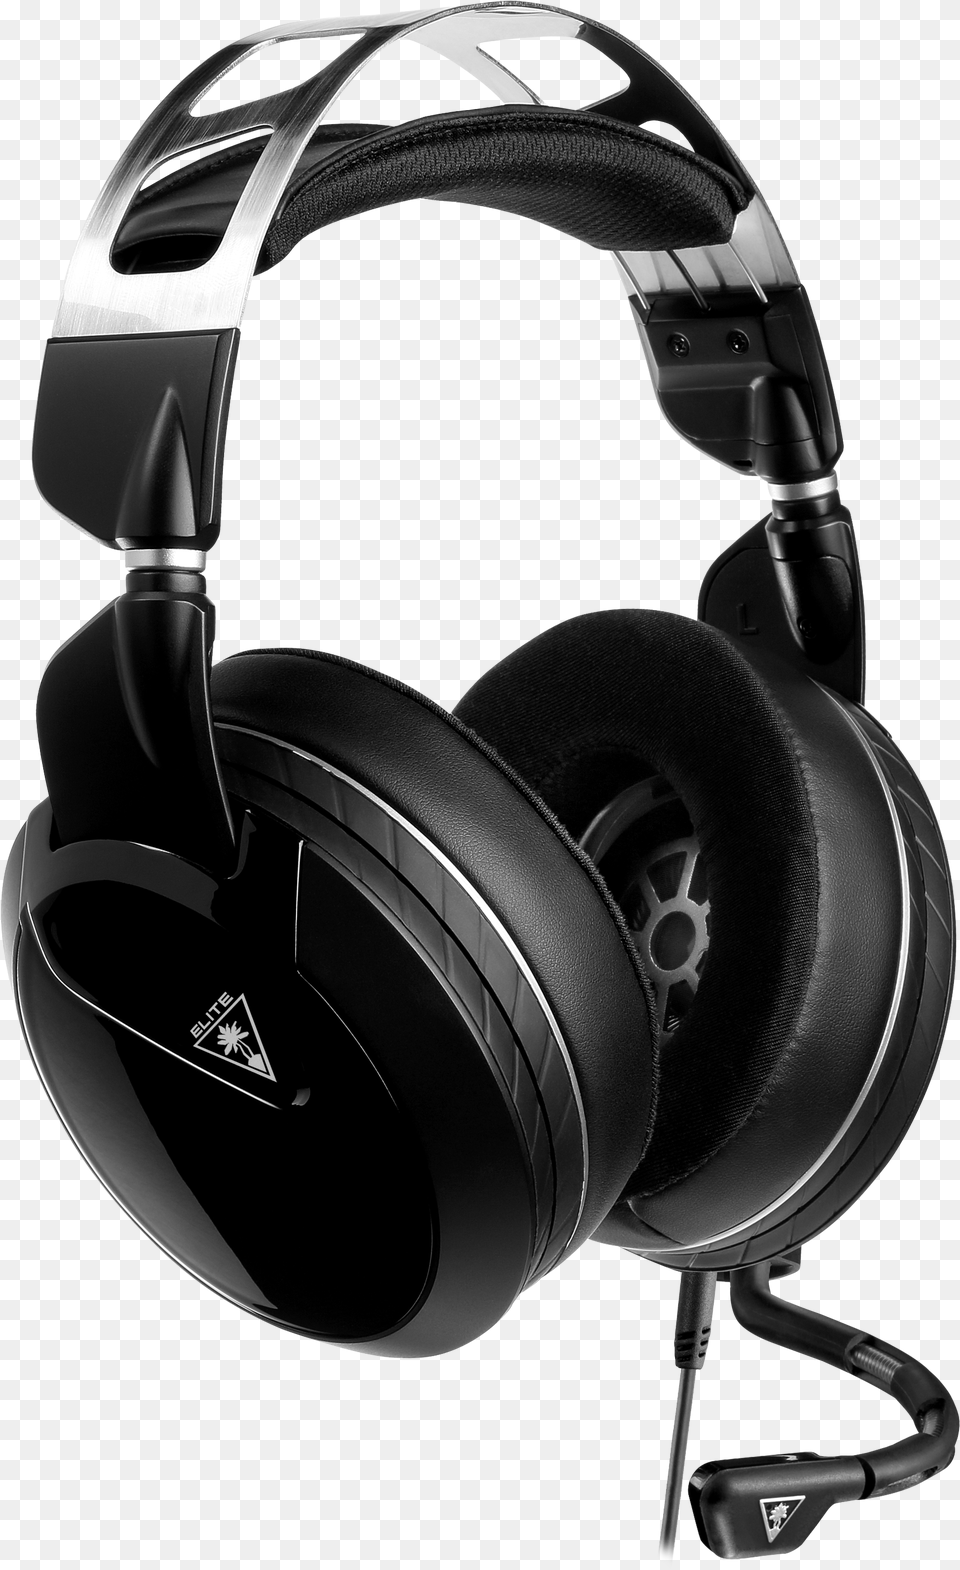 Elite Pro 2 Headset Superamp For Ps4 And Ps4 Pro Akg K553 Mkii, Electronics, Headphones Png Image